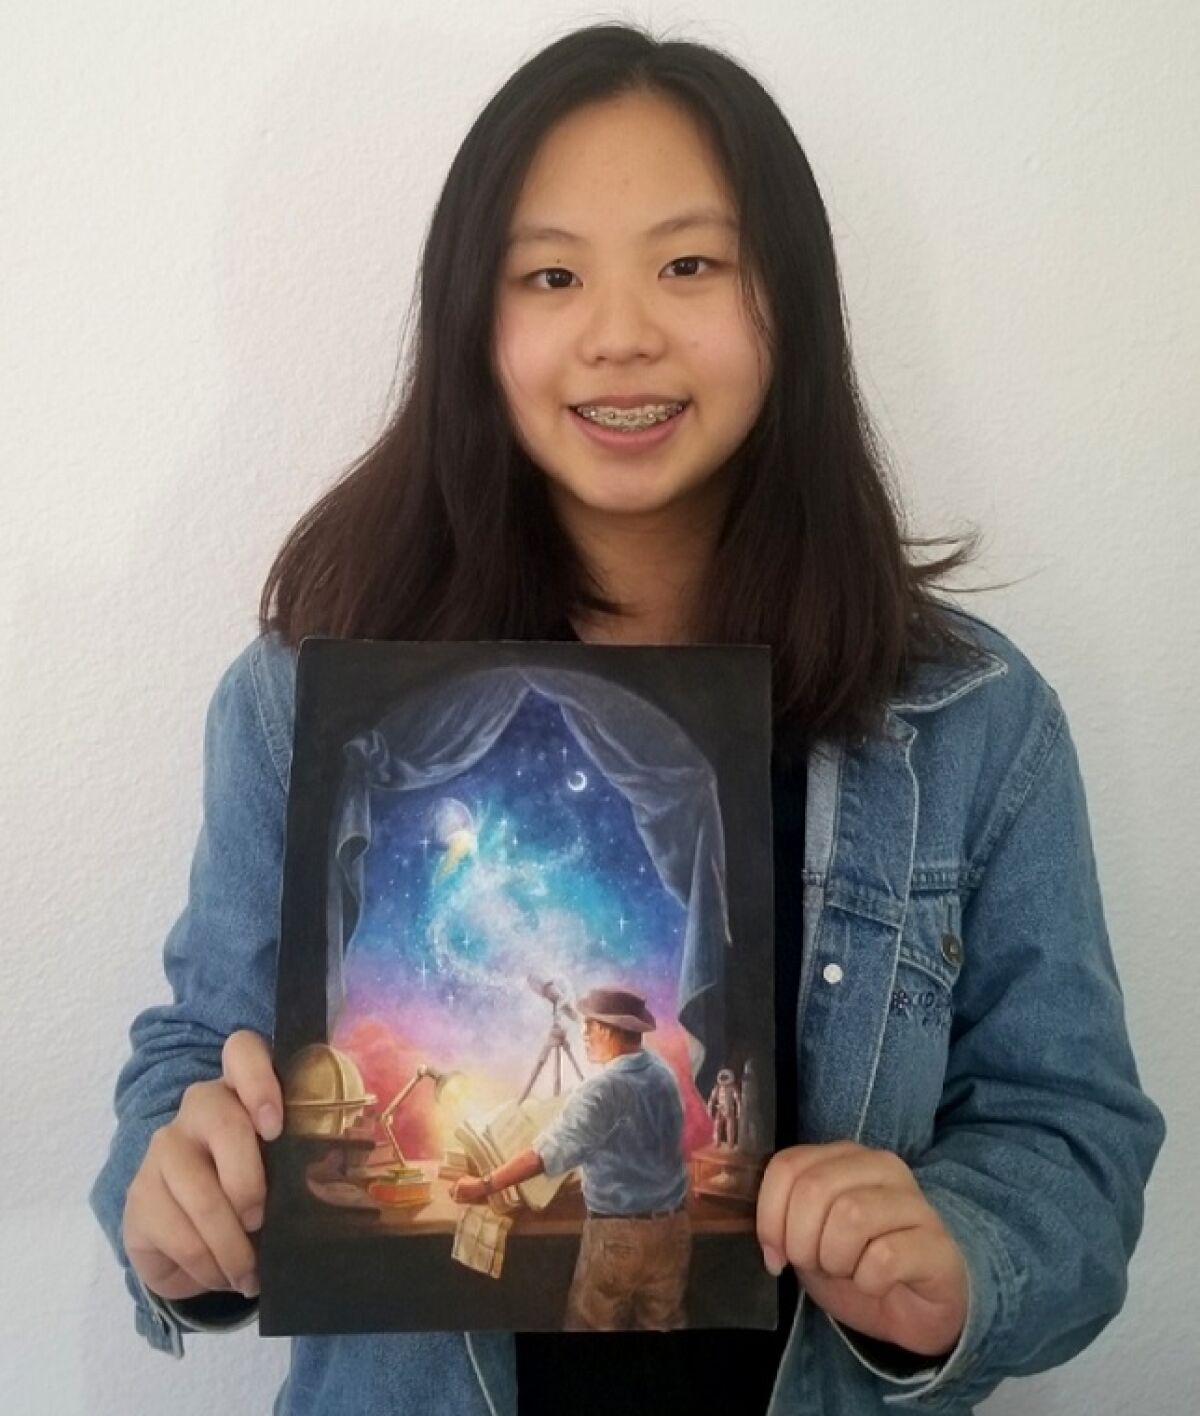 Westview High School 10th-grader Jenny Zhu has been awarded a second prize of $2,000 in the ArtEffect Project Competition.